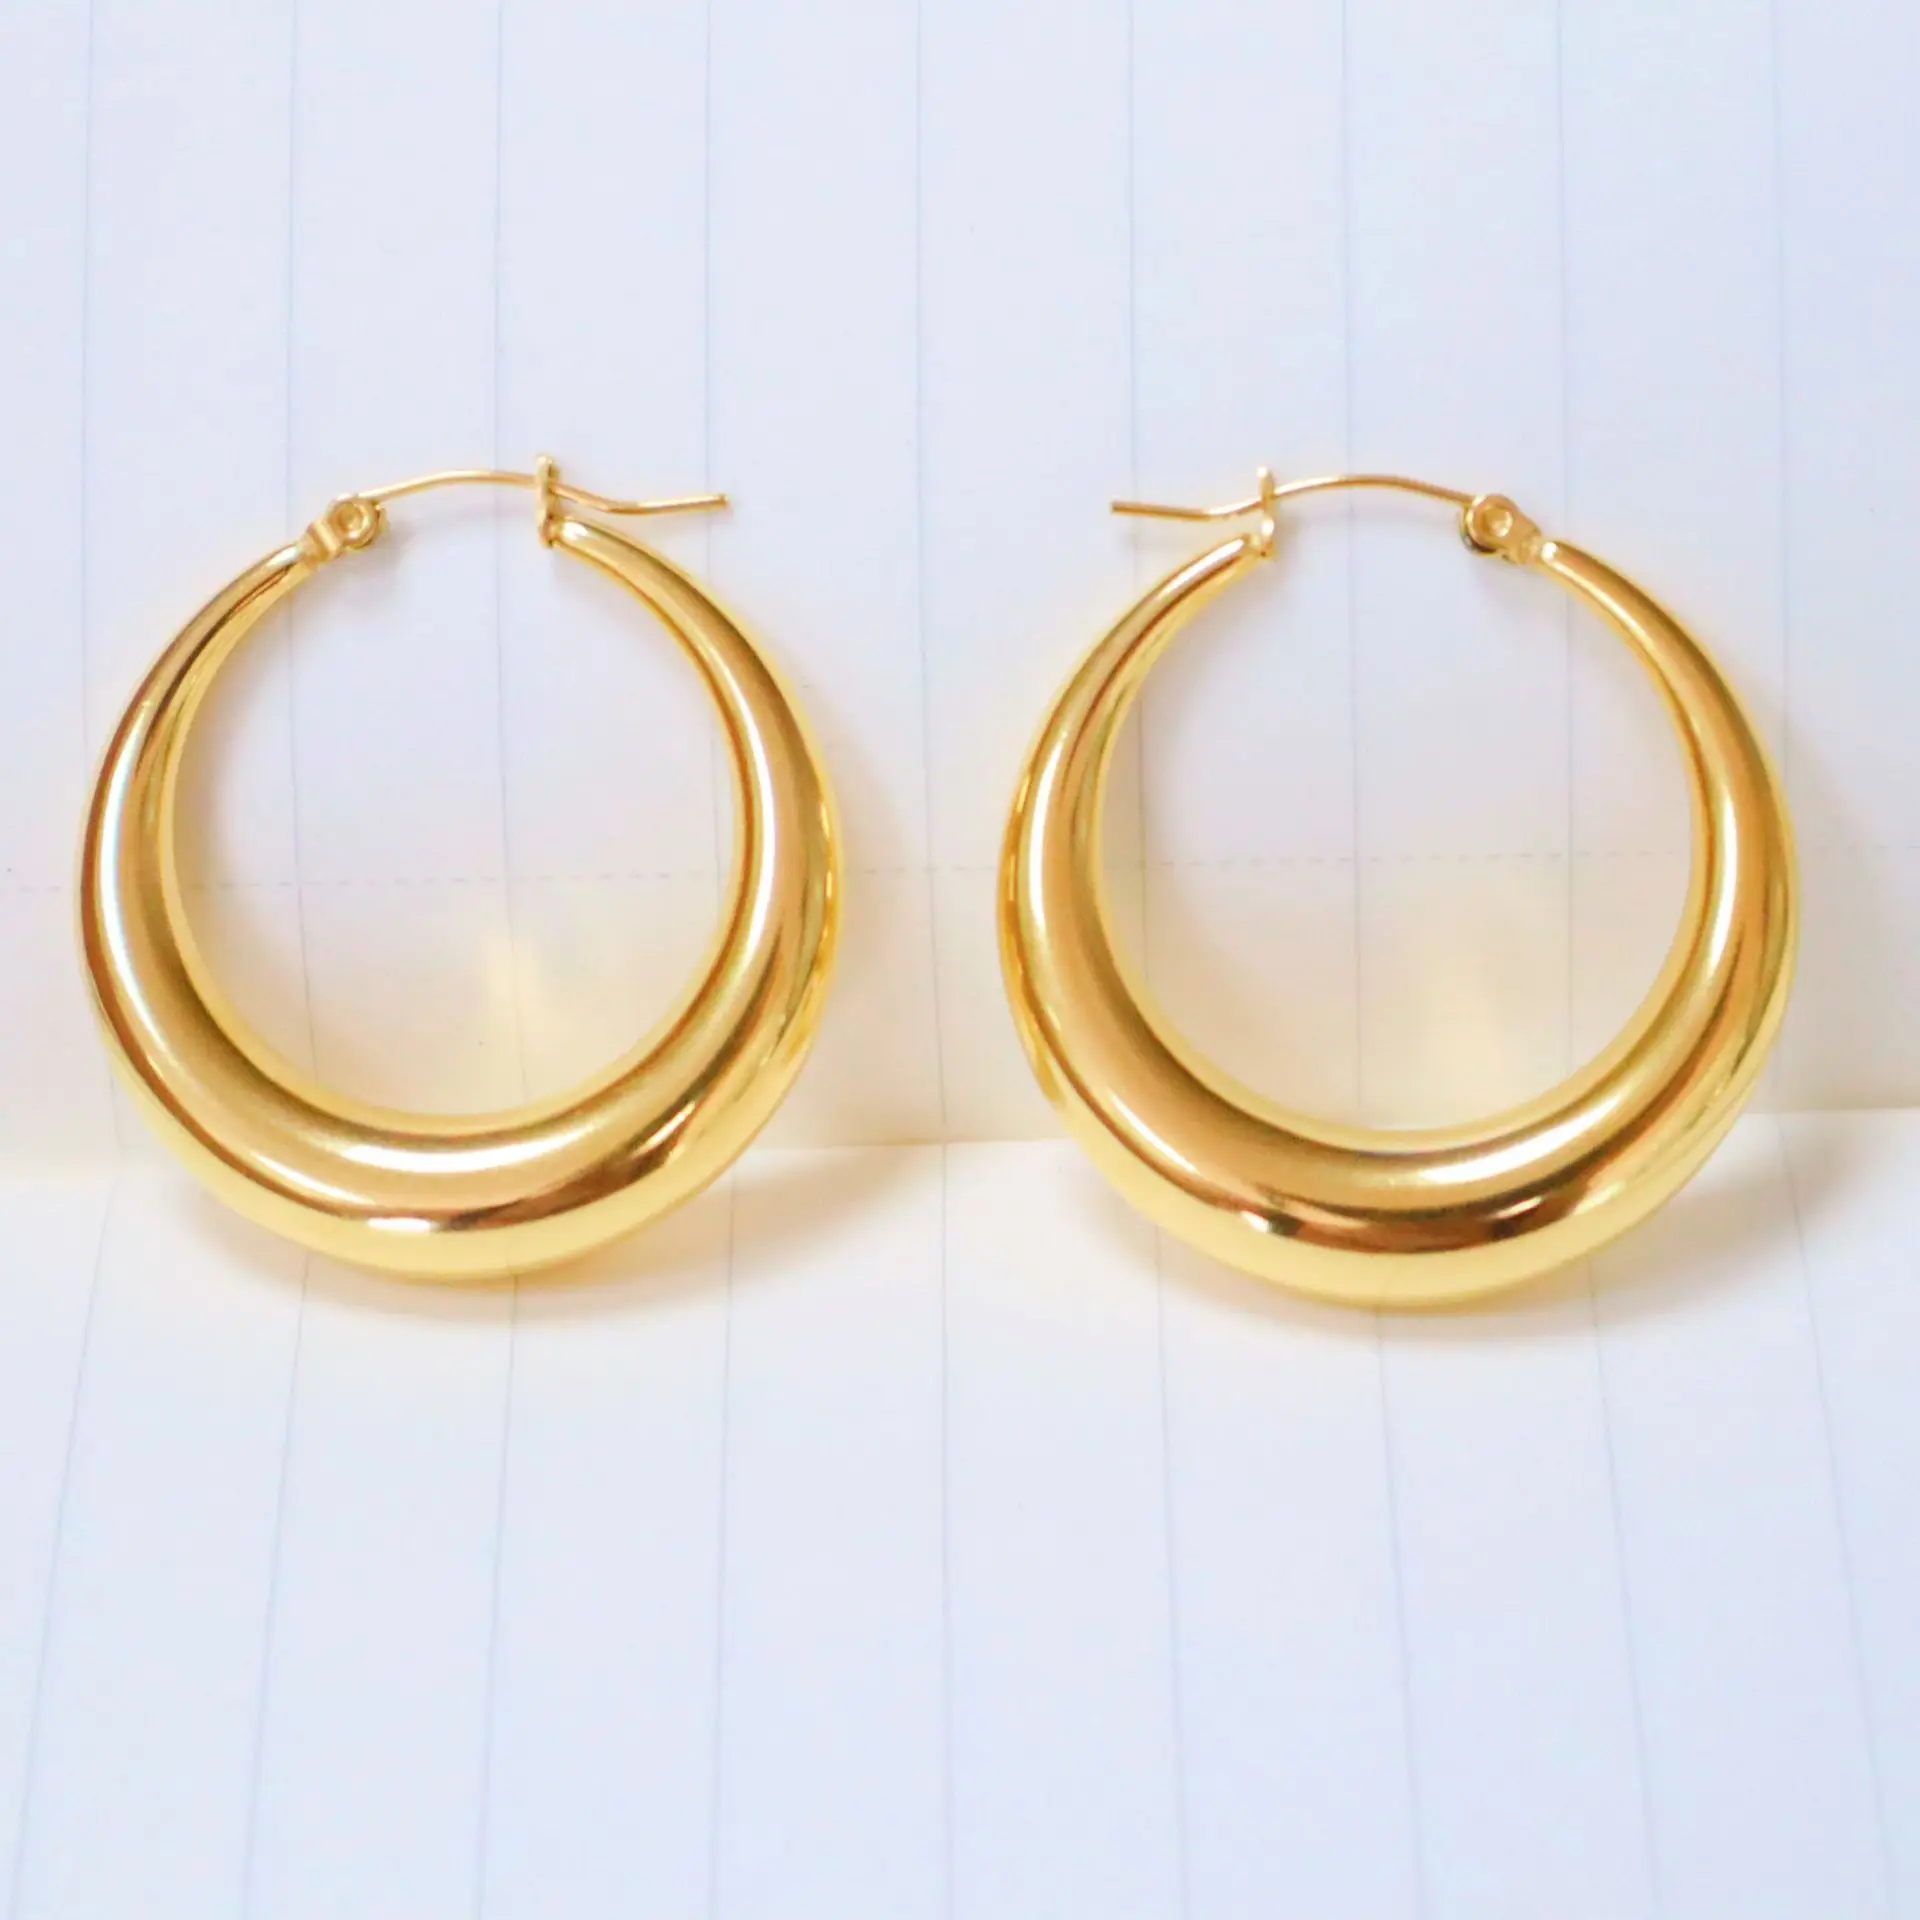 

18K Gold Plated Stainless Steel Big Smooth Circle Hoop Earrings Oversize Crescent Shaped Hoop Earrings for Women